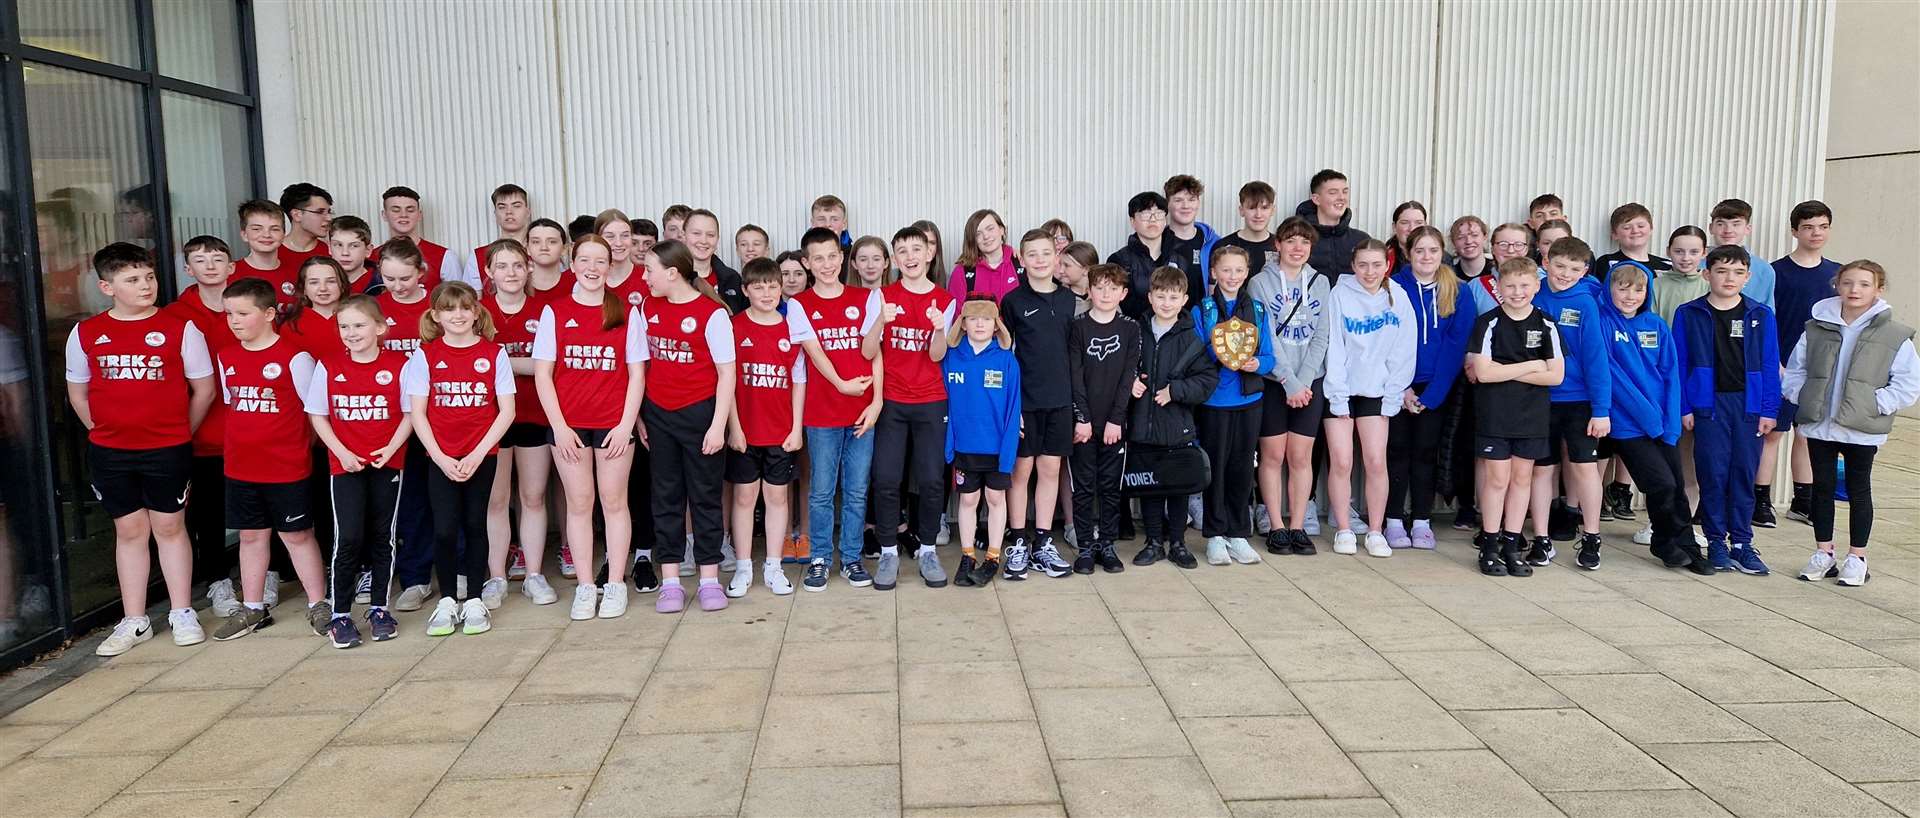 The Caithness and Orkney teams who took part in the inter-county event at the East Caithness Community Facility. There were three age groups, U13, U15s and U18.